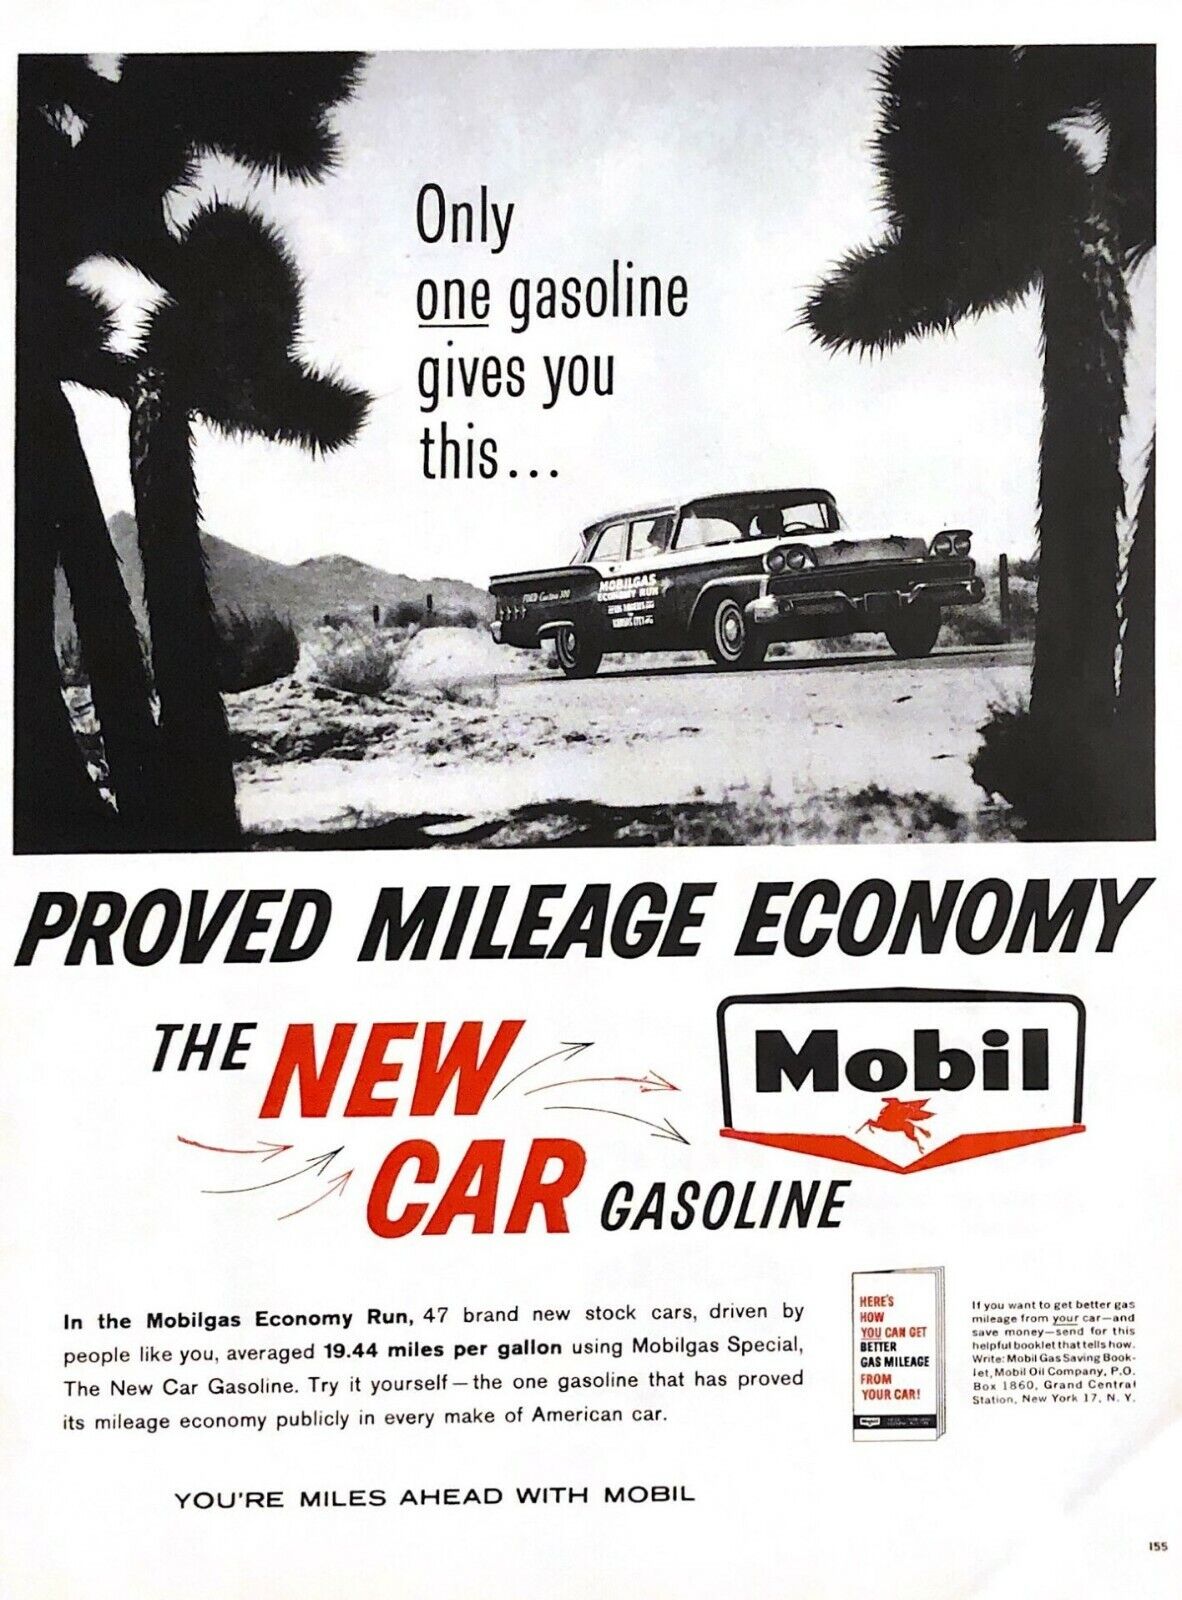 1959 Mobil Oil Vintage Print Ad The New Car Gasoline Proved Mileage Economy 